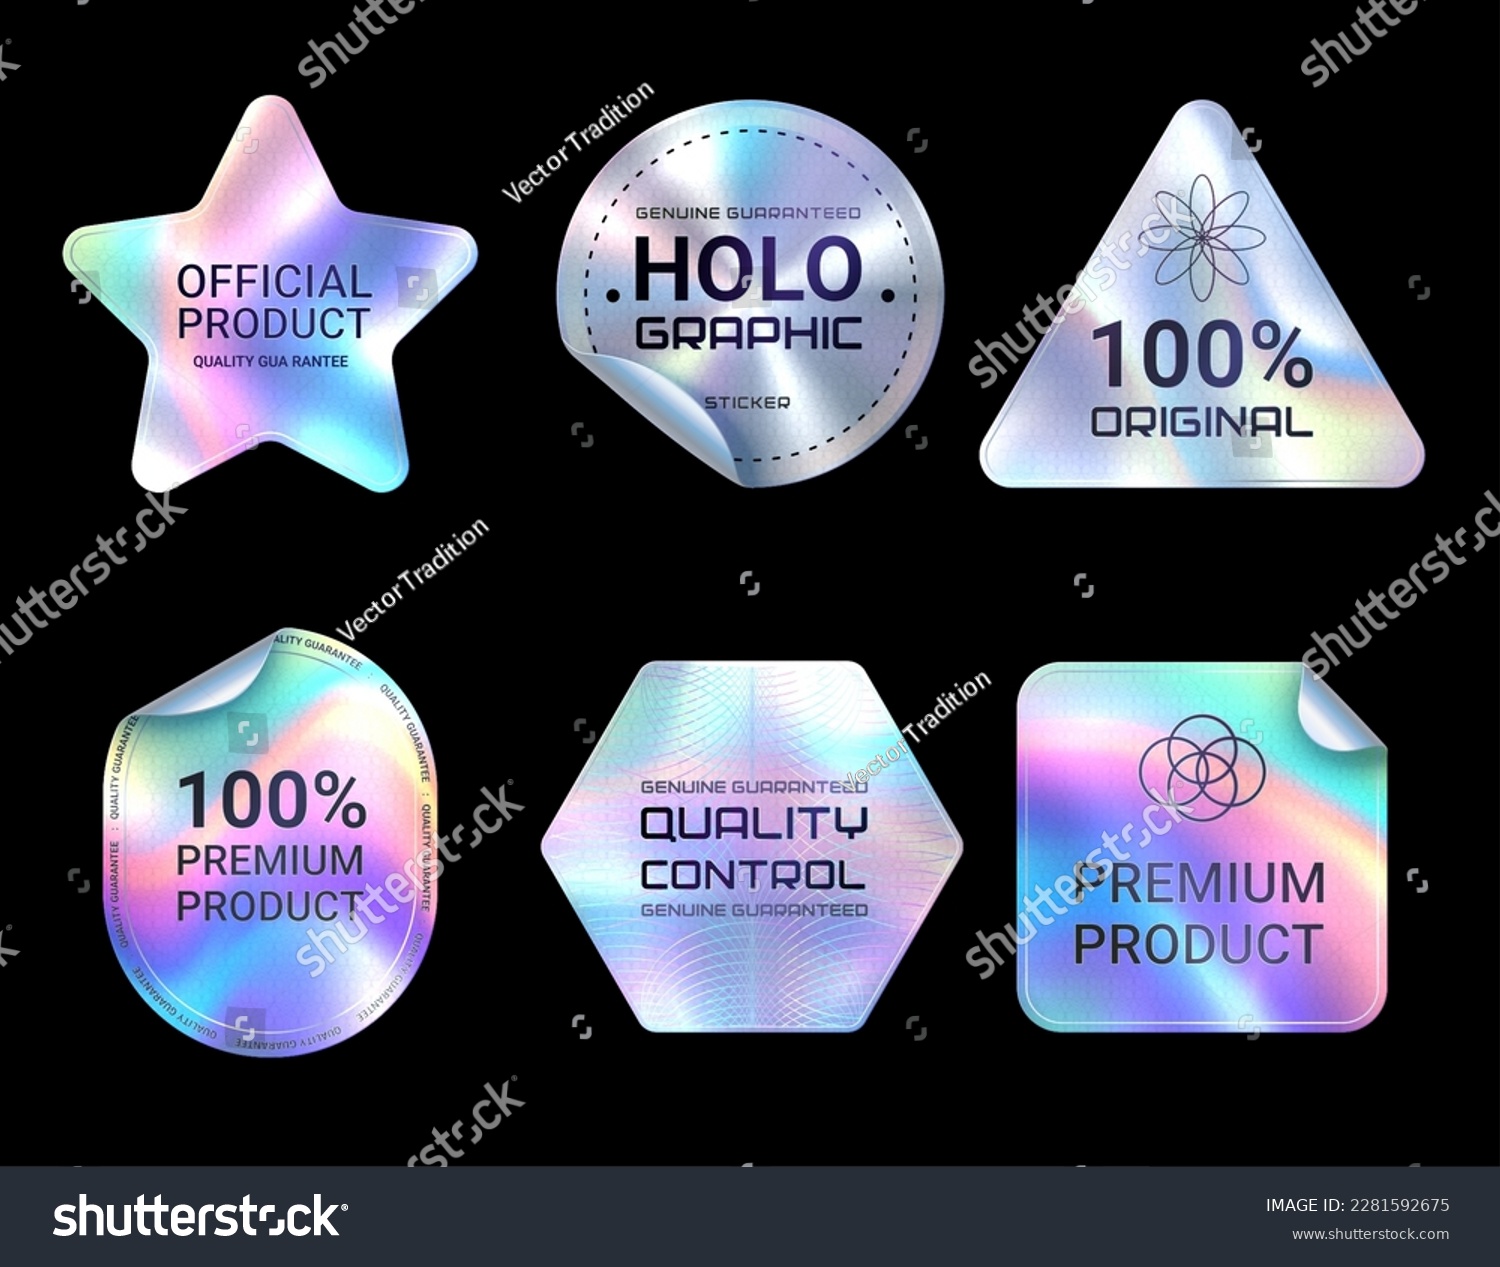 Quality hologram stickers. Official certified, original and premium product iridescent vector labels. Star, circle, triangle and pentagon shape holographic stickers, quality guarantee symbol or tag #2281592675